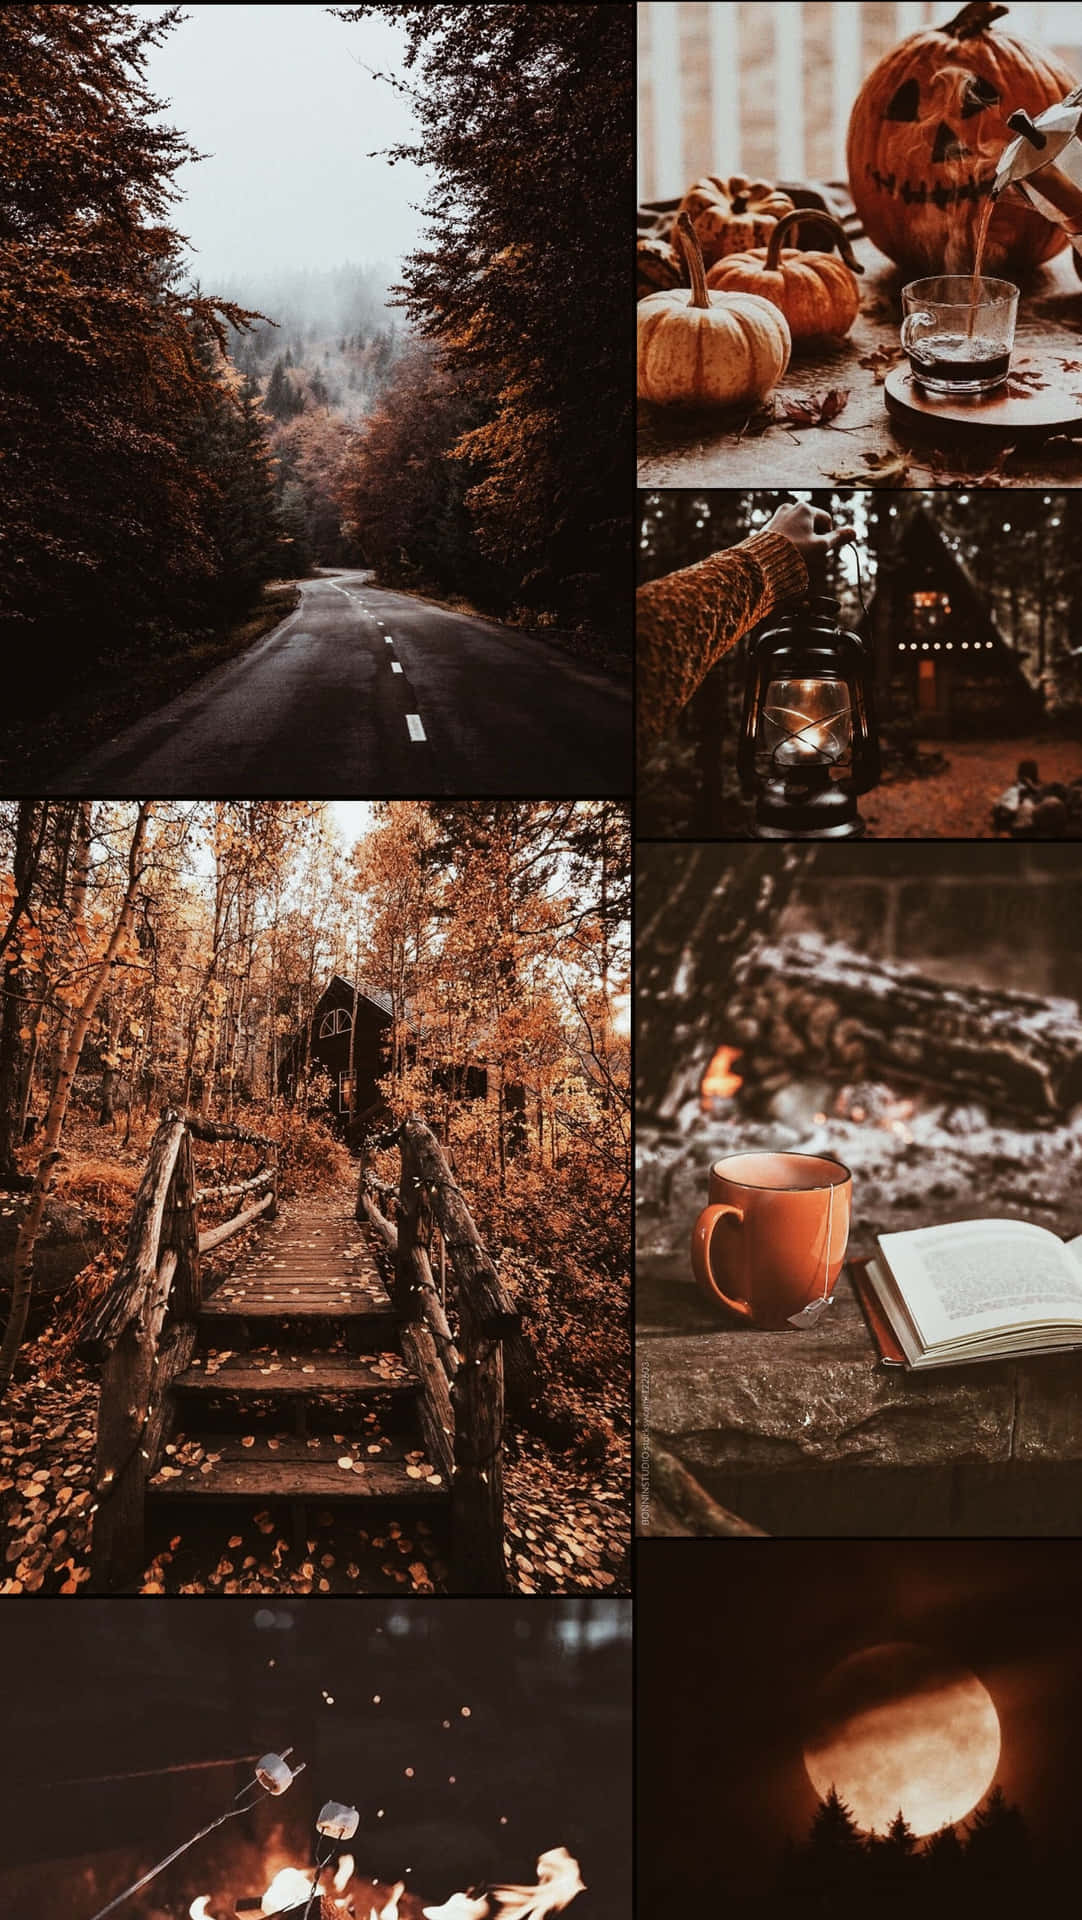 Enjoy a peaceful yet Aesthetic Fall Day